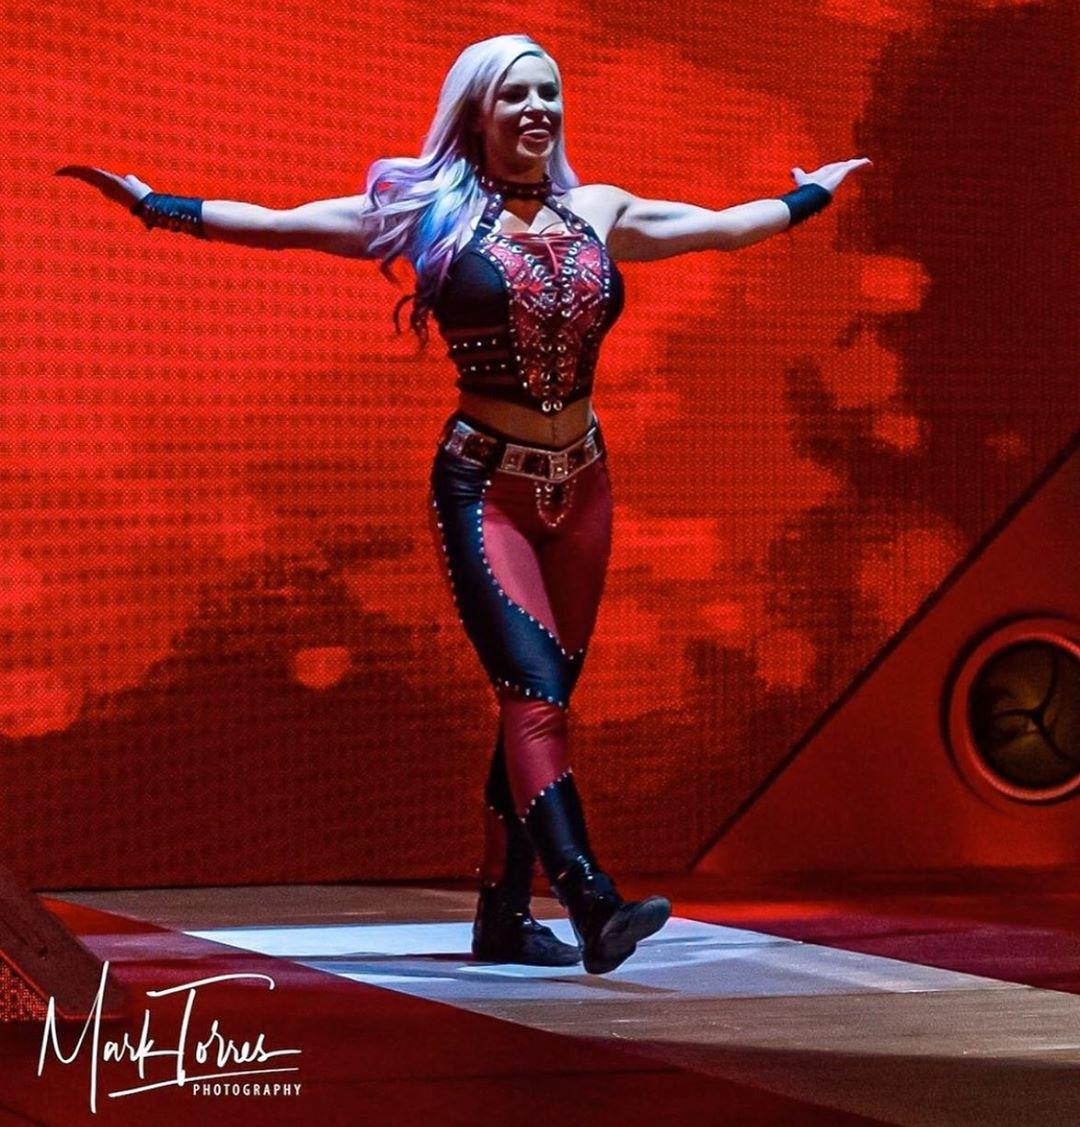 70+ Hot Pictures Of Dana Brooke Show Off This WWE Diva’s Sexy Body 491